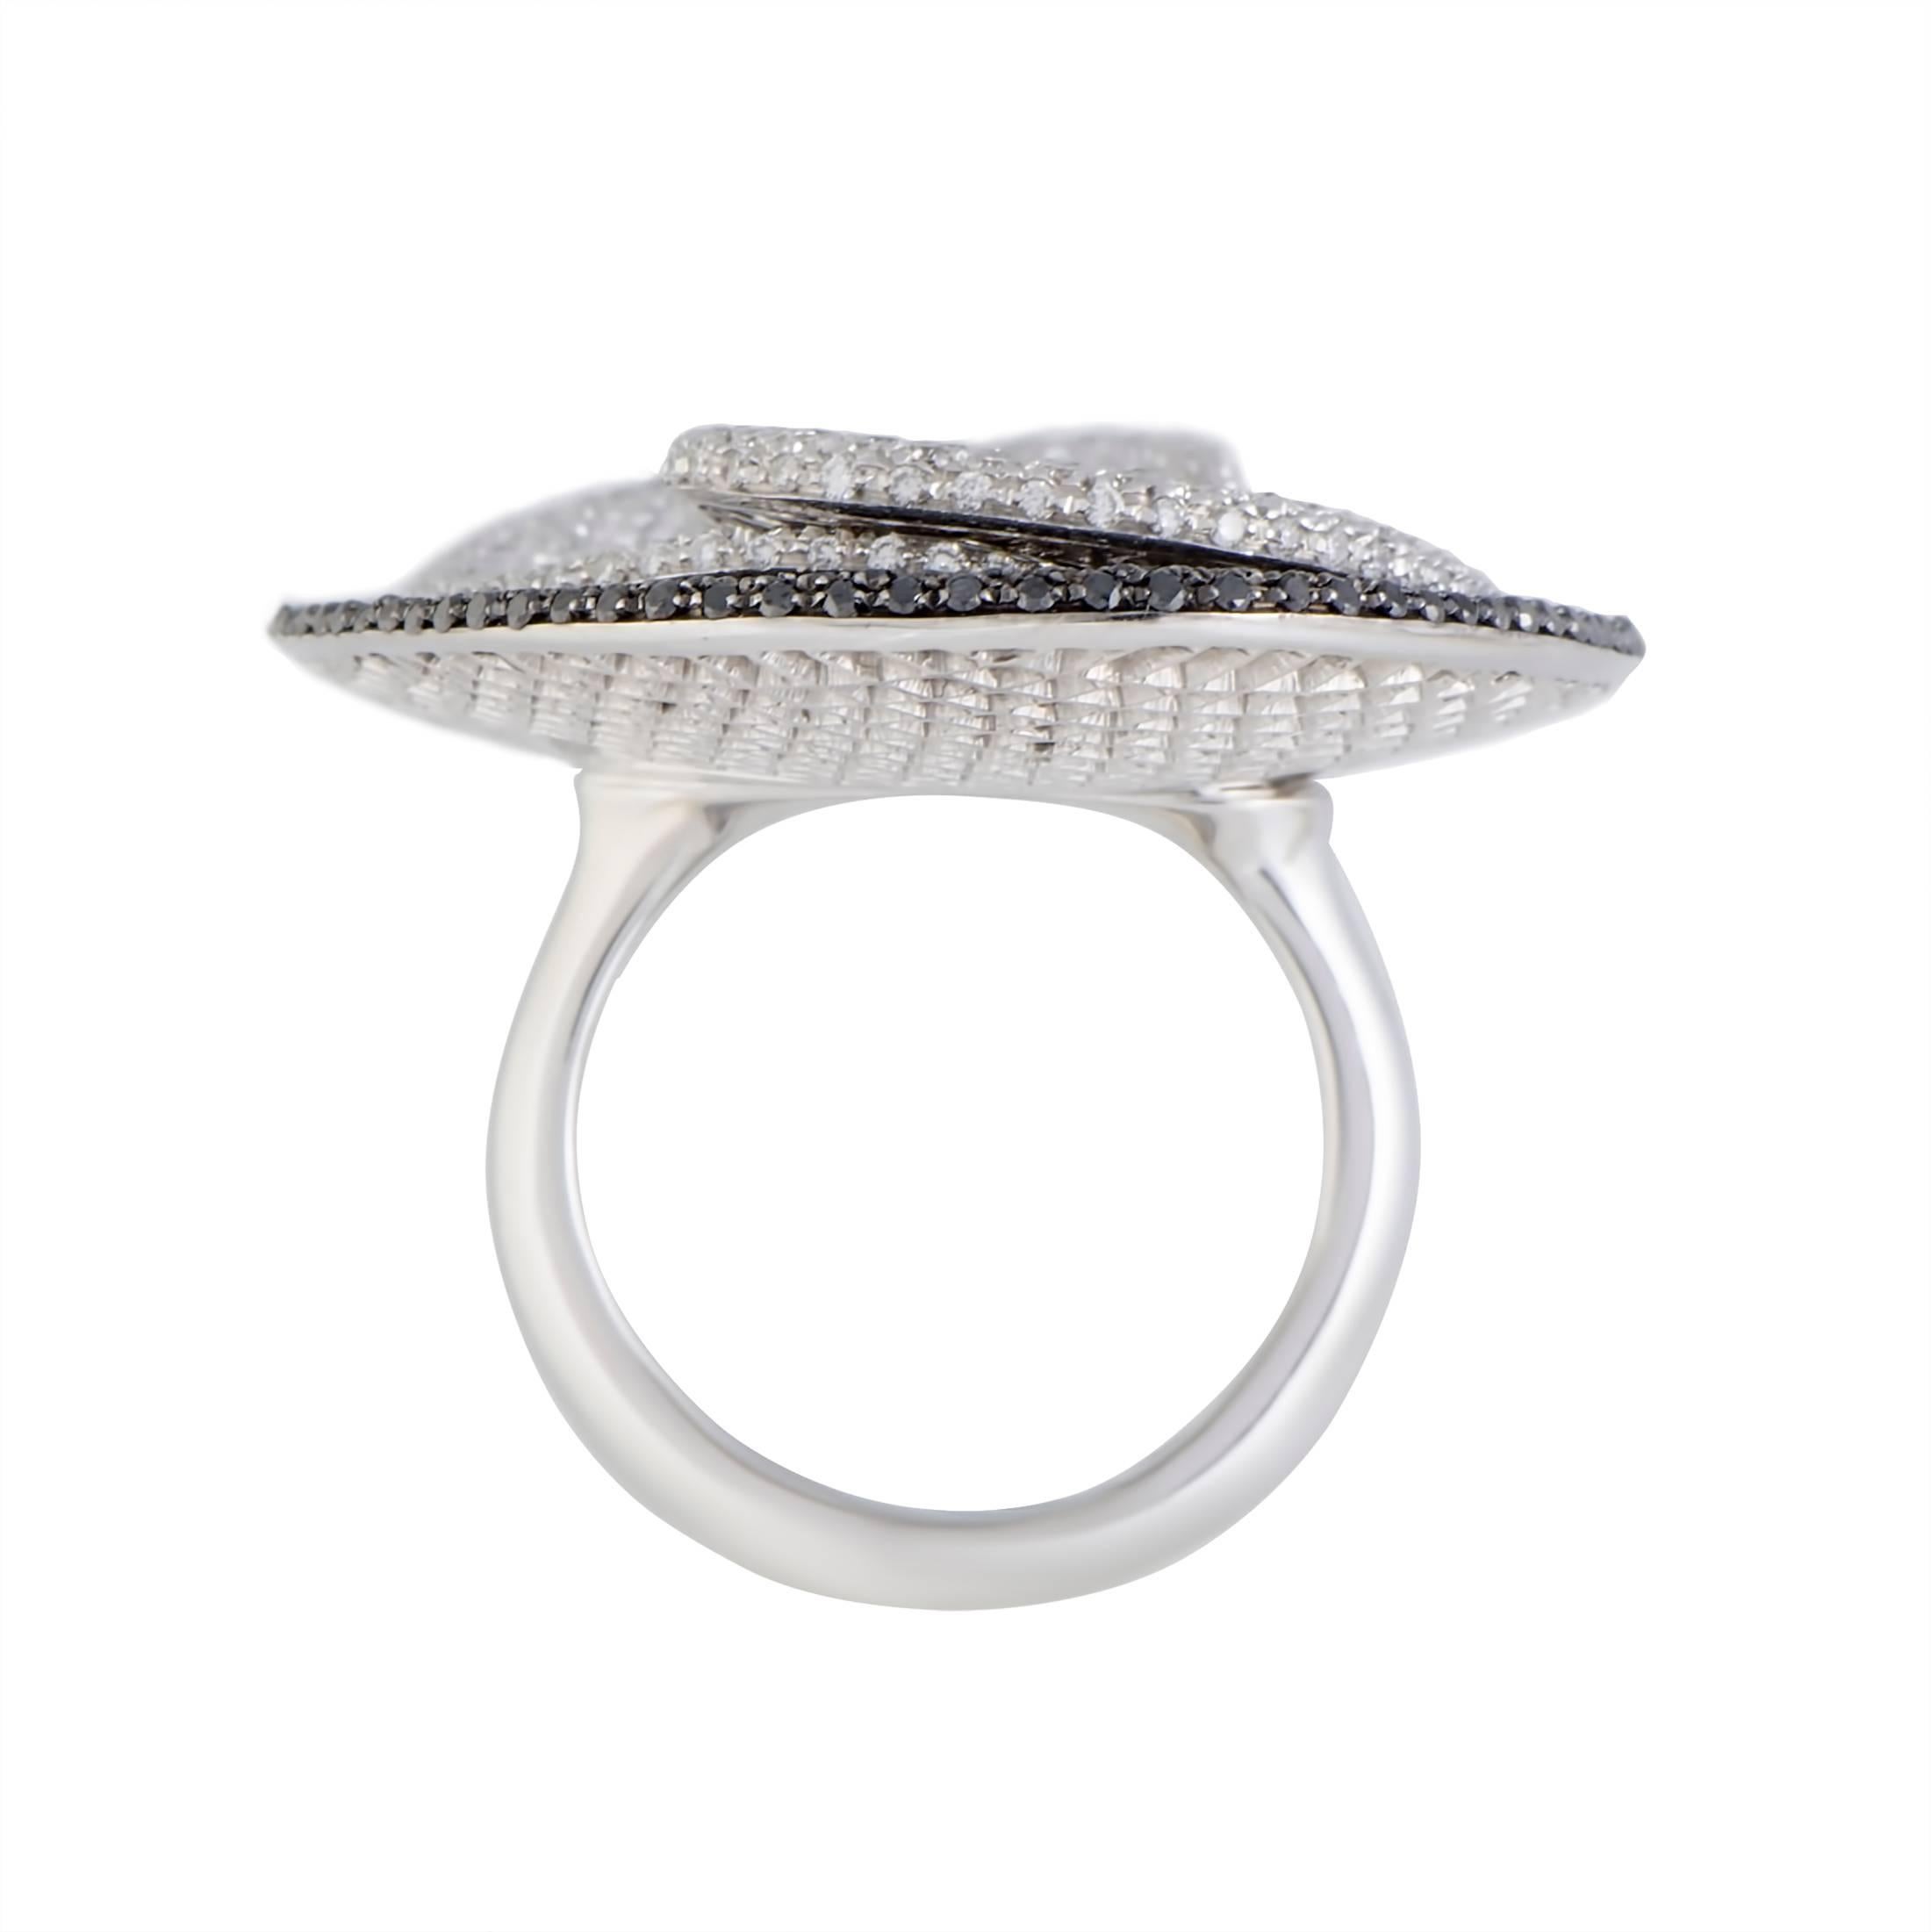 With a design reminiscent of a graceful flower, this gorgeous Palmiero ring enchants with its harmonious diamond setting. The ring is made of elegant 18K white gold and paved with white and black diamonds that weigh in total 10.63 carats.
Ring Size: